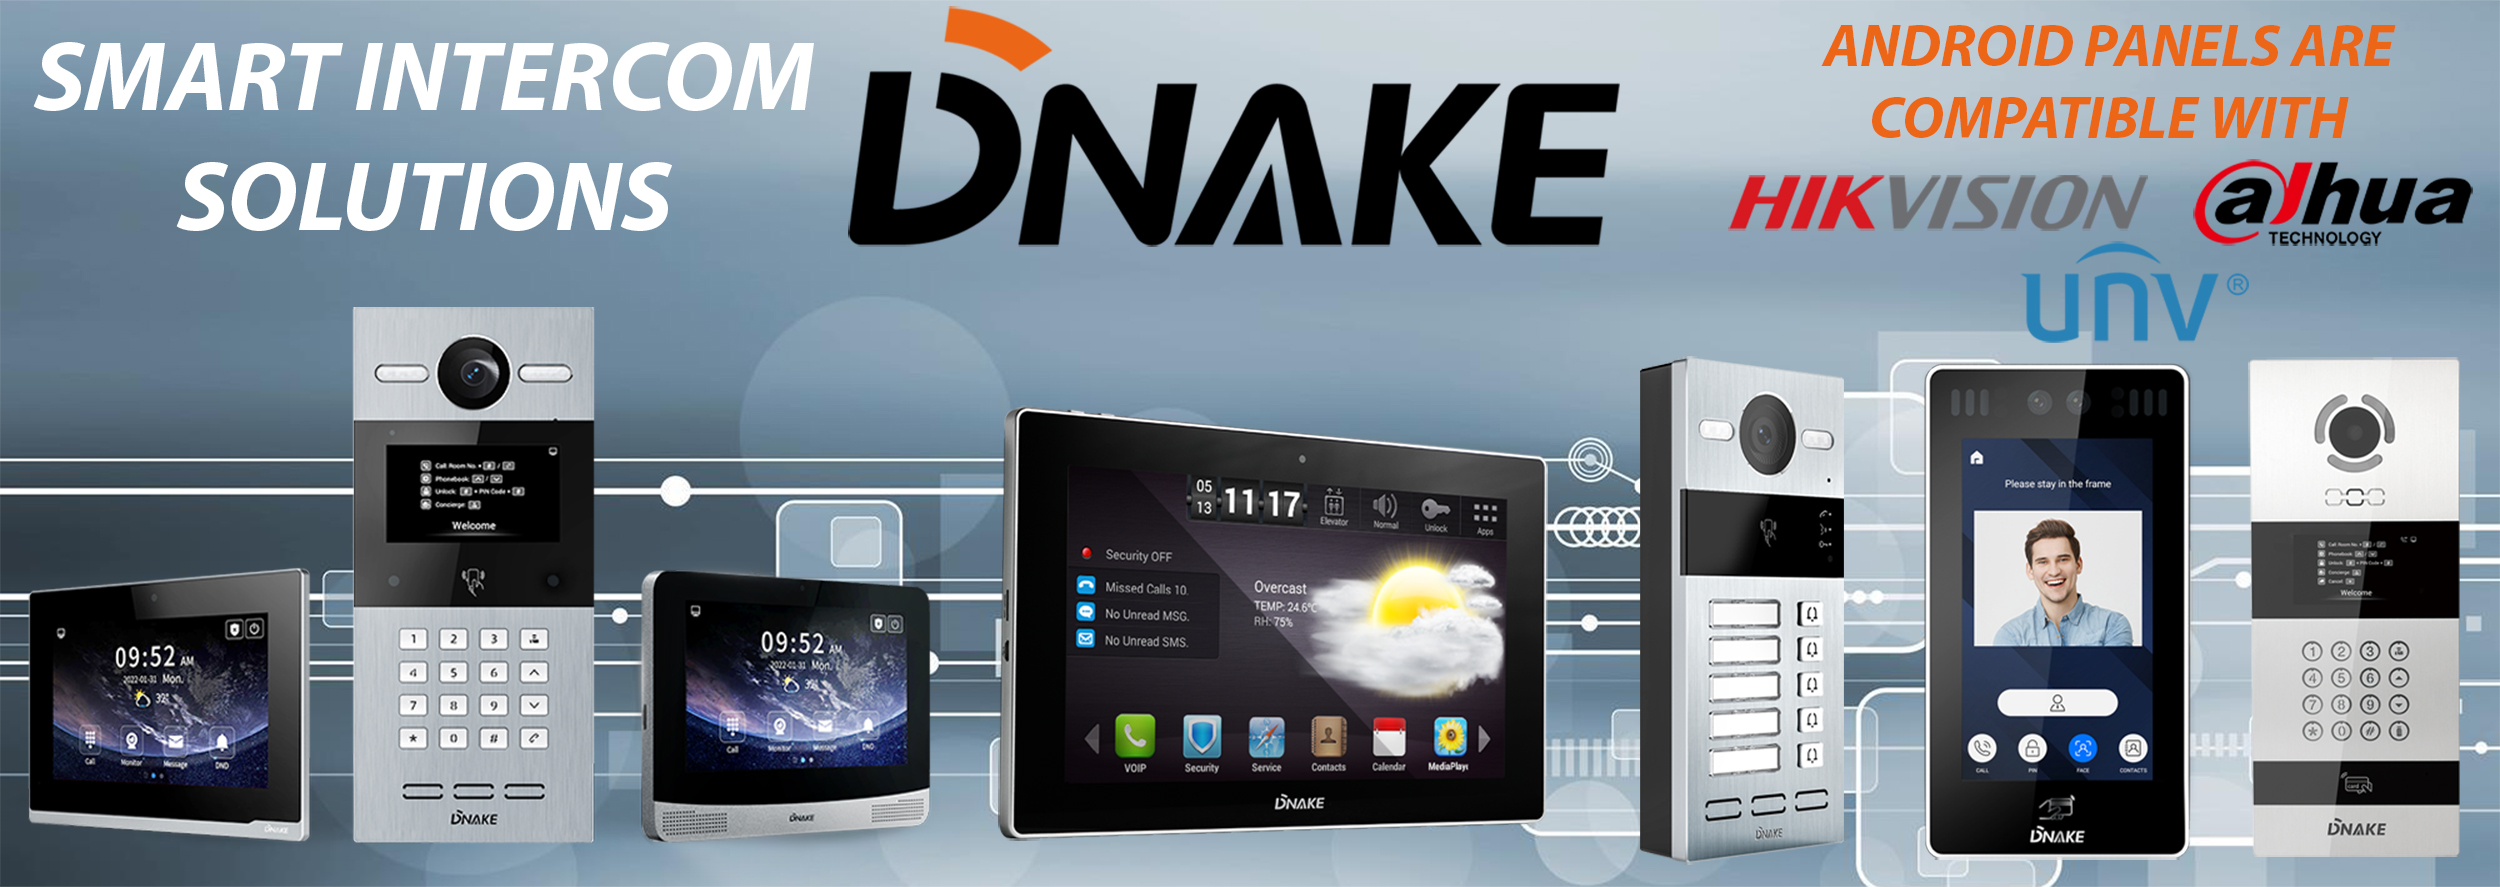 INTRODUCTION TO DNAKE - Smart Intercom Solutions